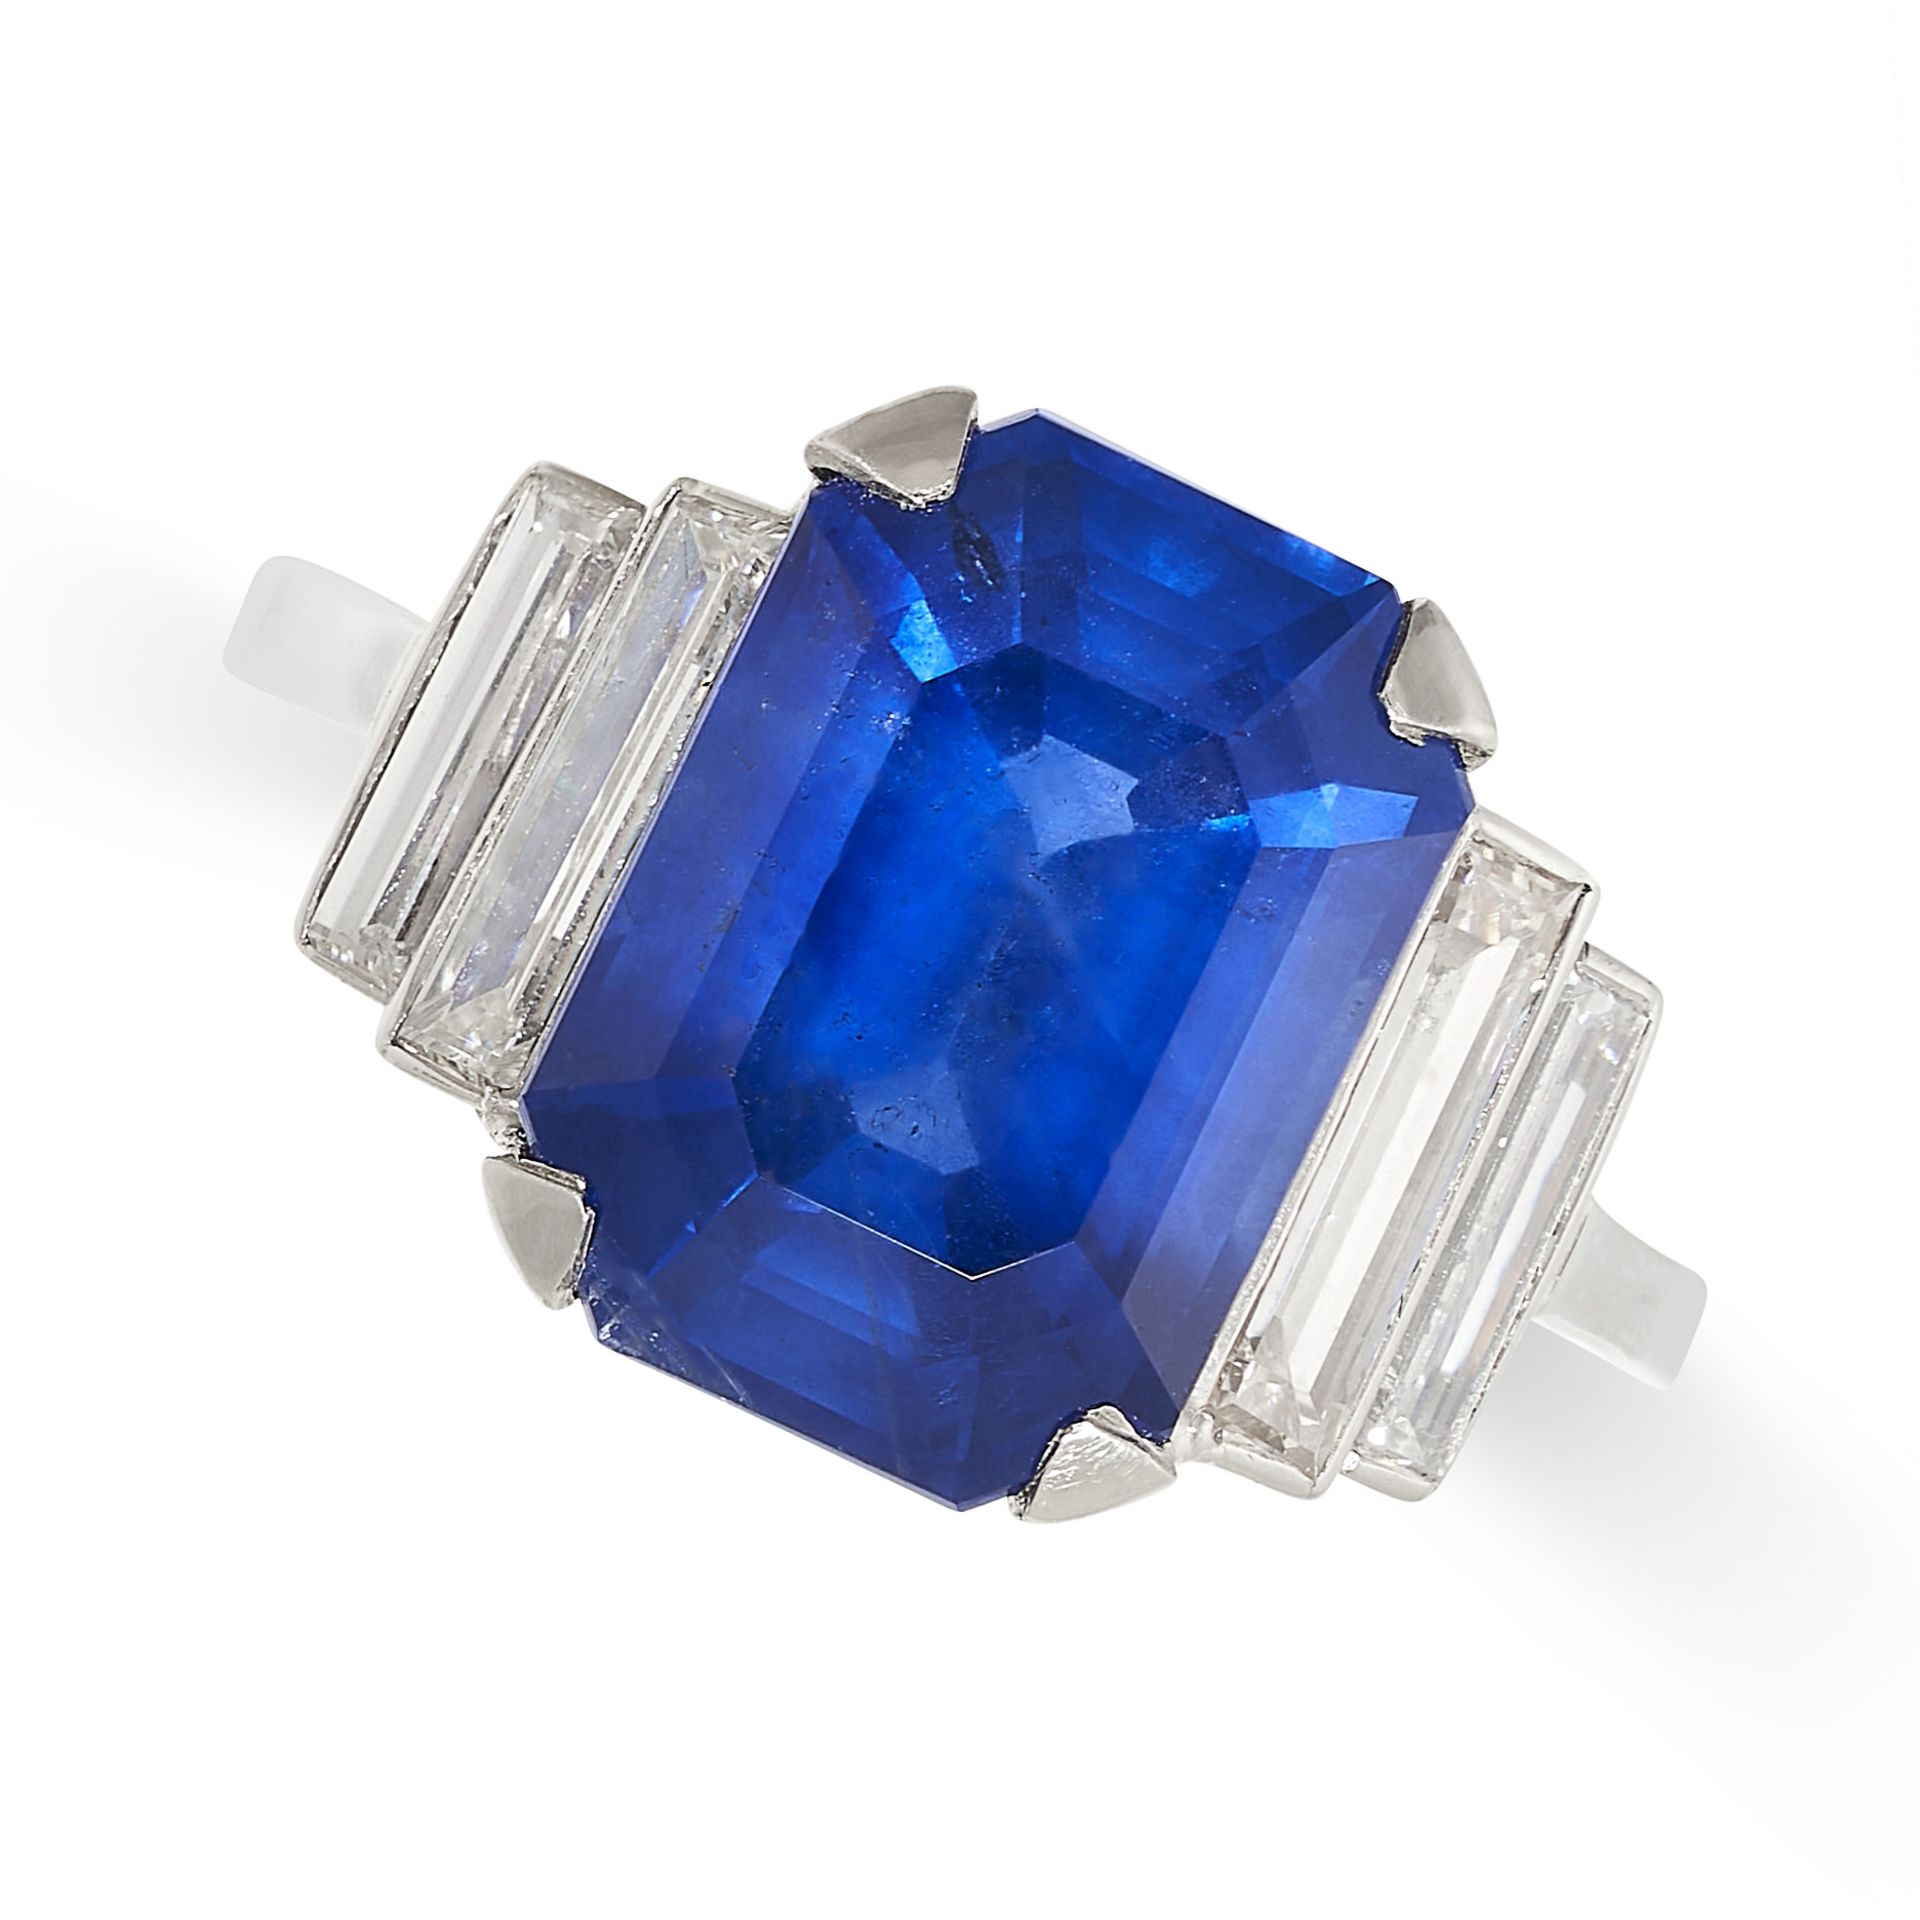 A FINE ART DECO SAPPHIRE AND DIAMOND RING in platinum, set with an emerald cut sapphire of 5.88